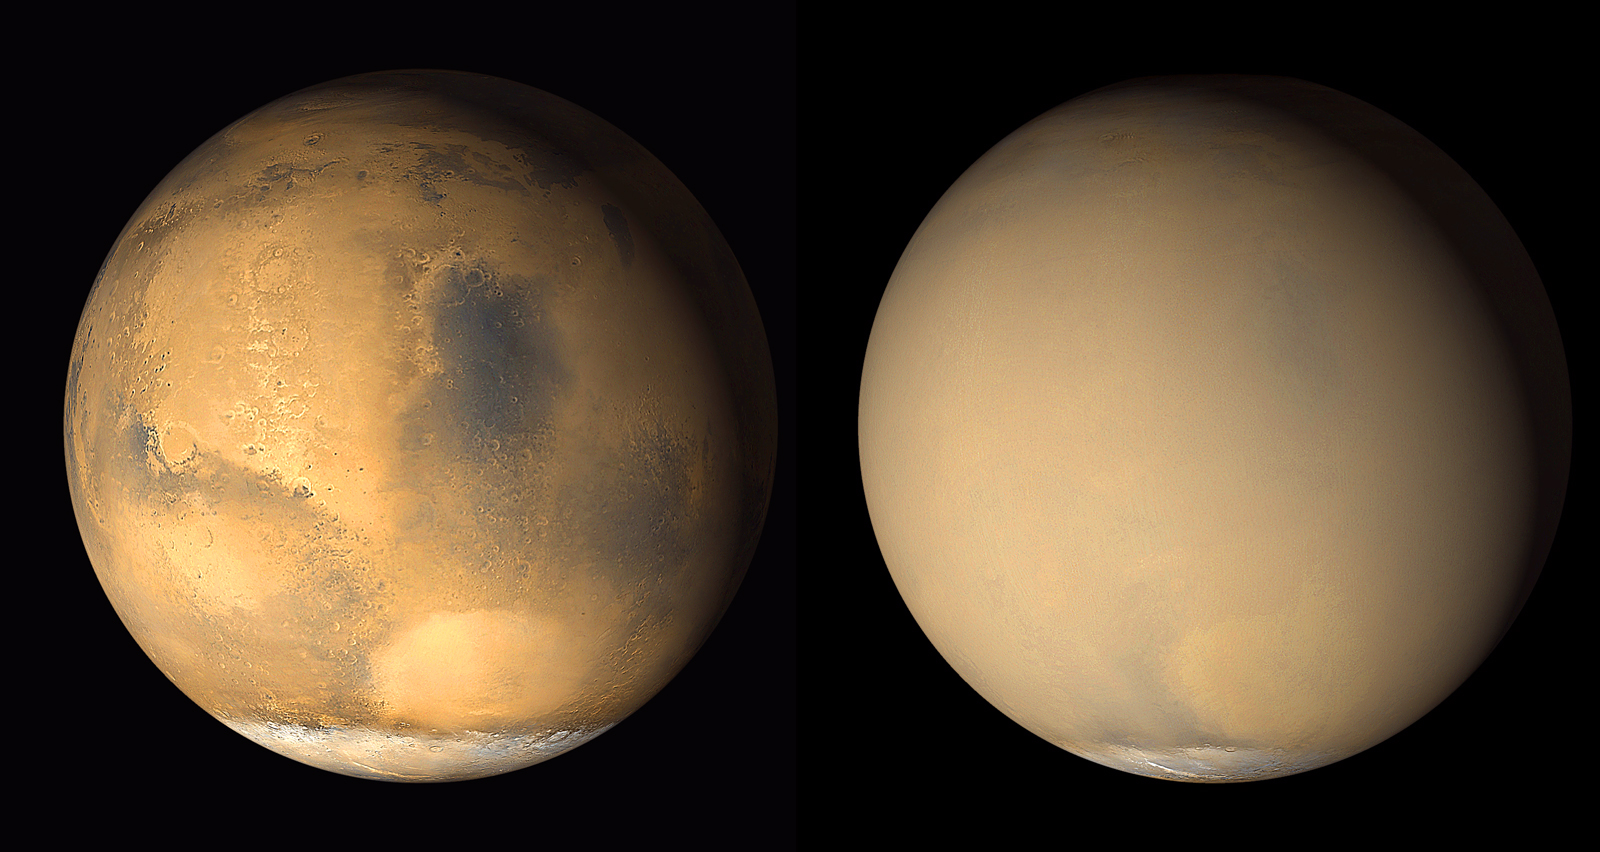 wo 2001 images from the Mars Orbiter Camera on NASA's Mars Global Surveyor orbiter show a dramatic change in the planet's appearance when haze raised by dust-storm activity in the south became globally distributed.